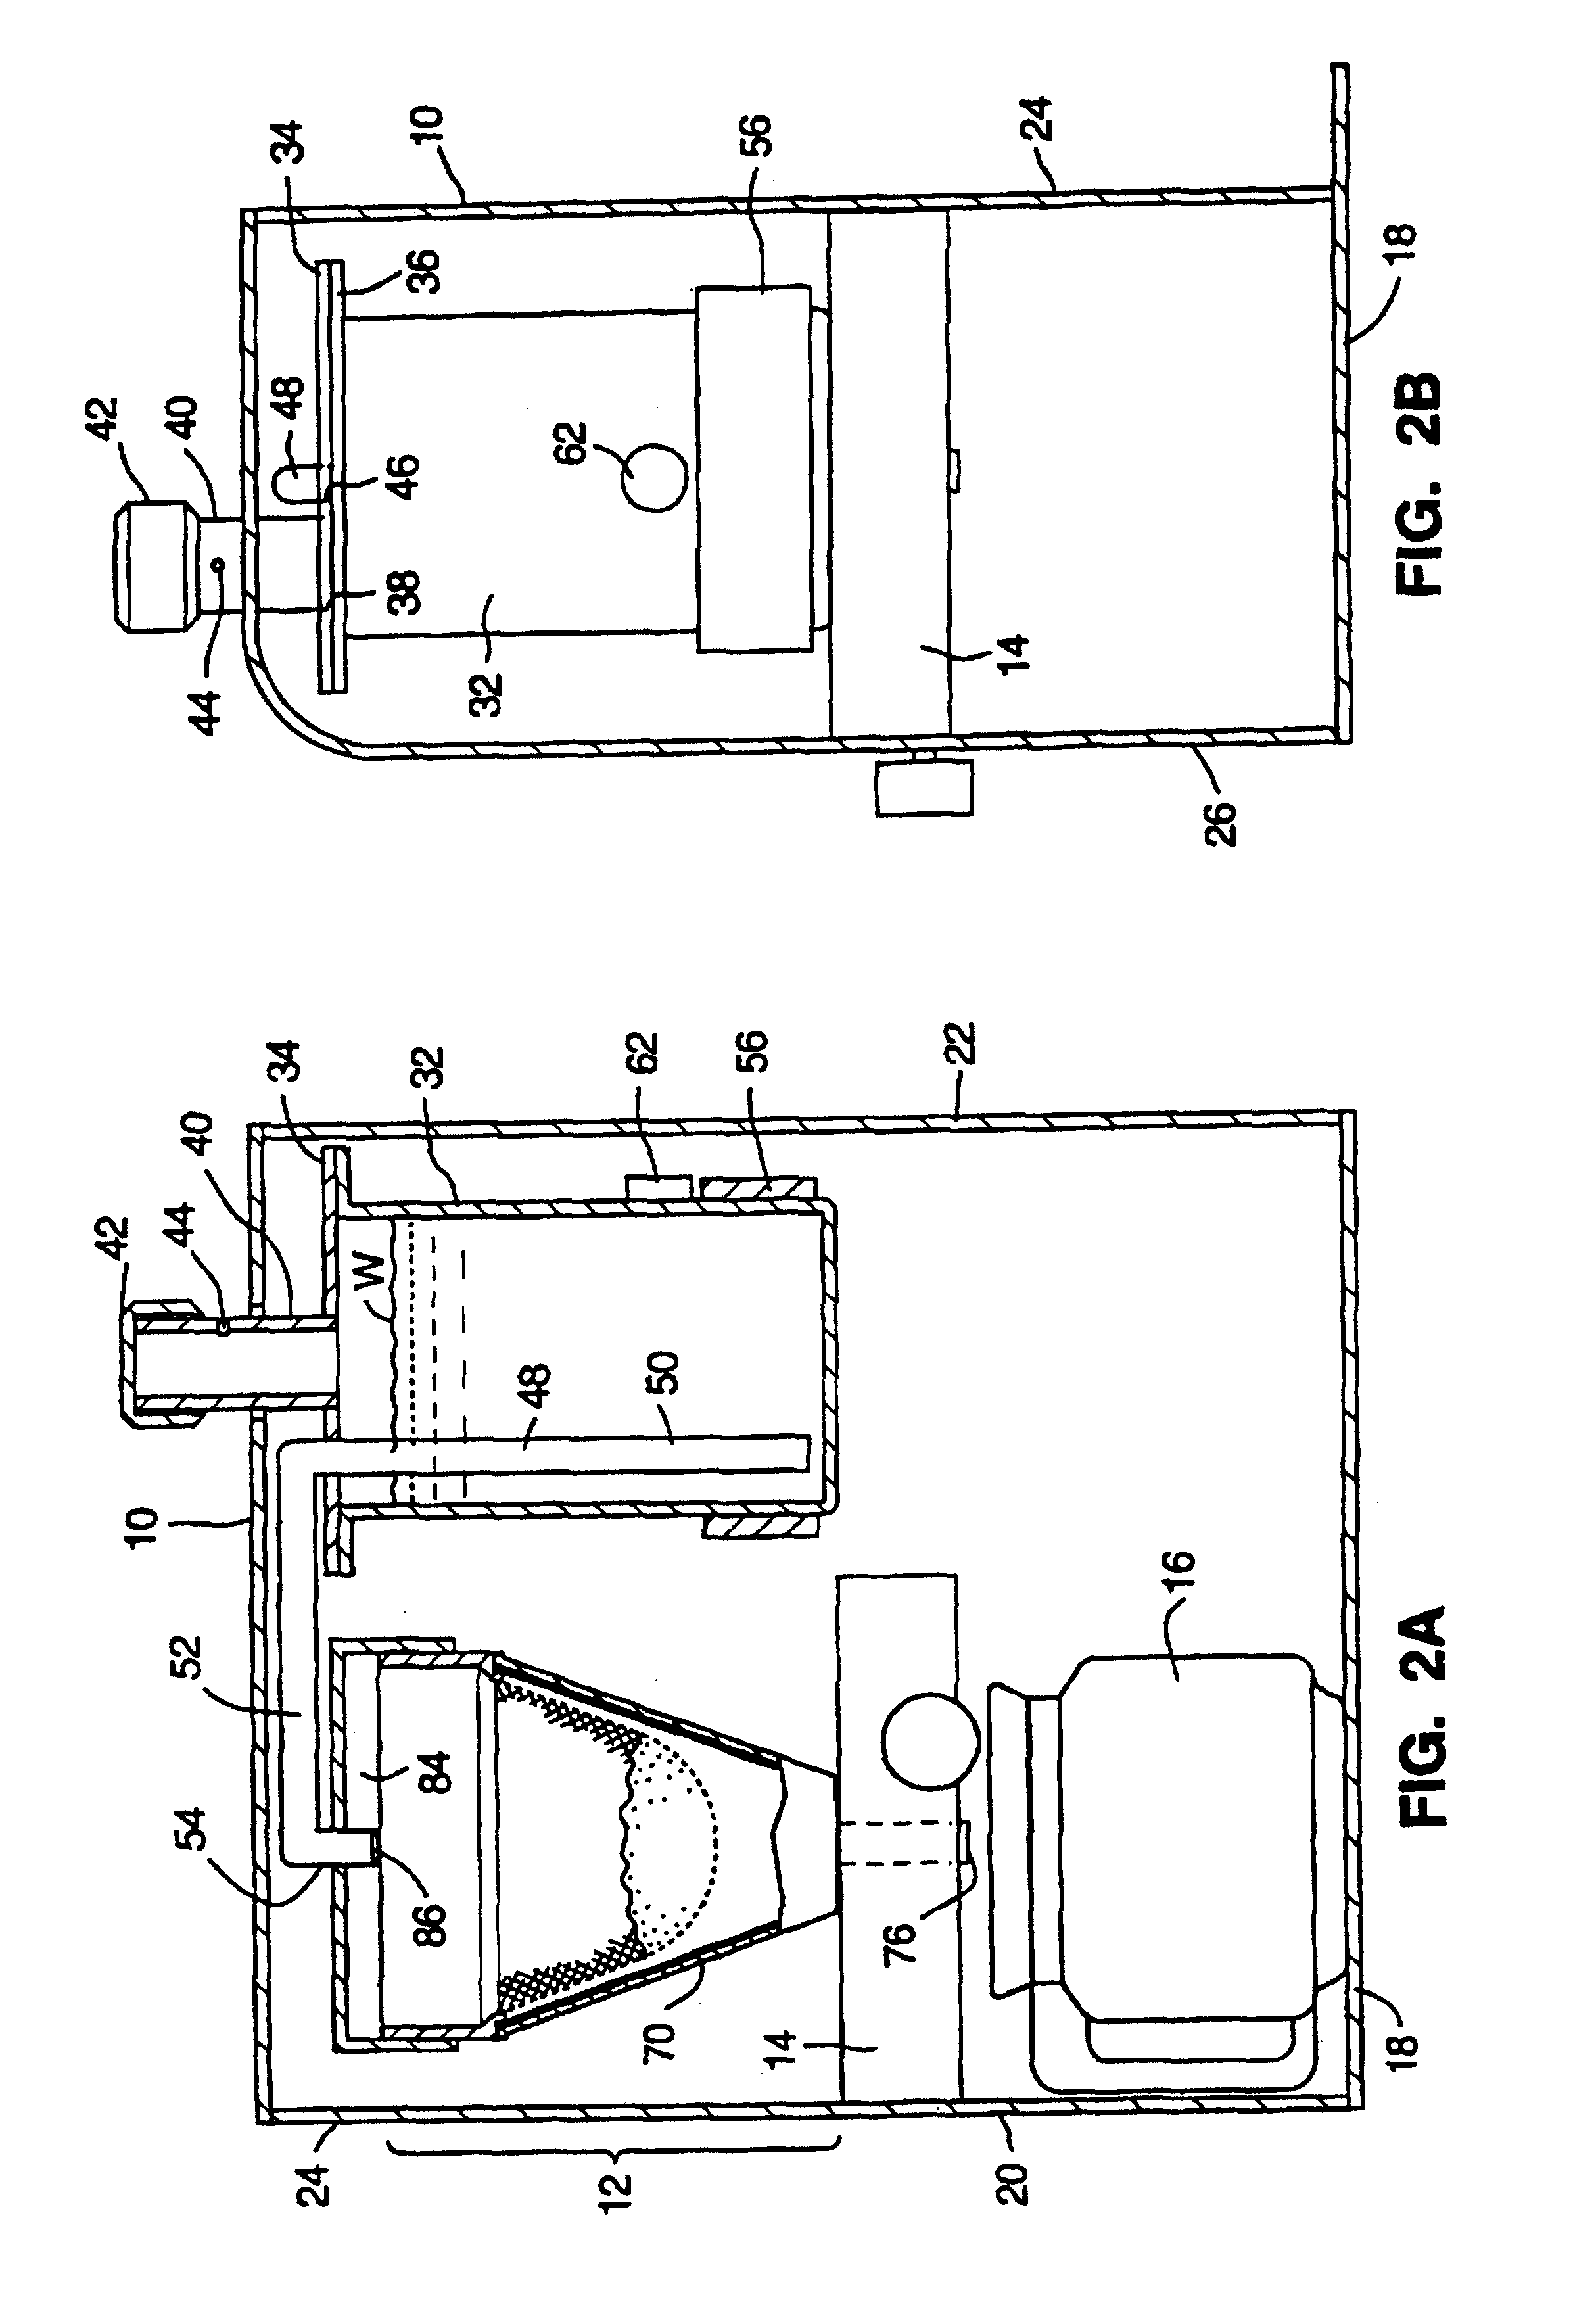 Coffee and tea brewing apparatus and system